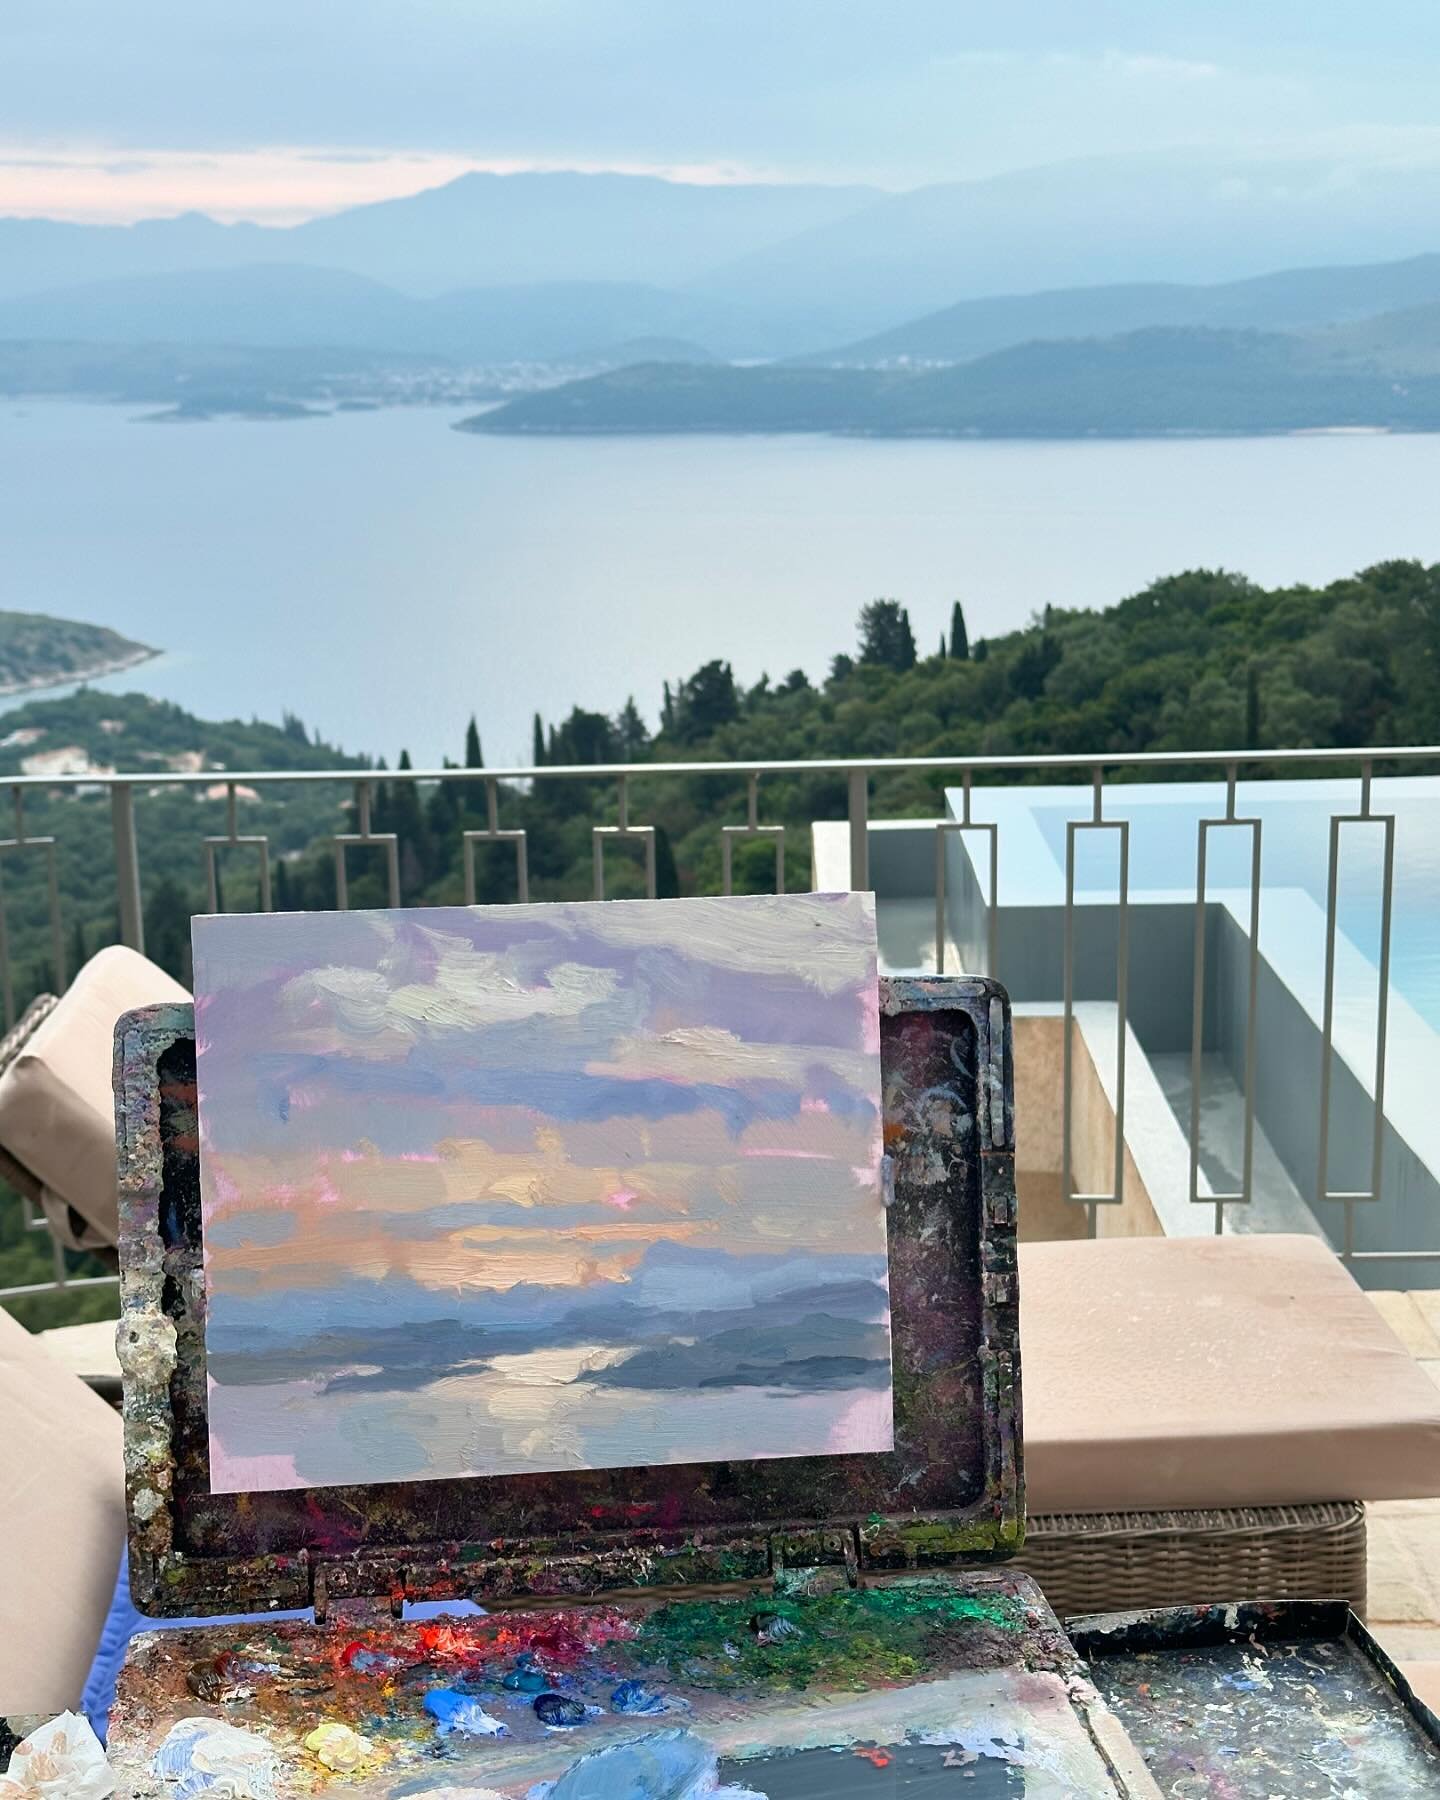 🎨 A R T I S T  R E A T R E A T 🎨 
First morning paint in Corfu and it was bliss ✨

Thank you @villacollective x
In support of @albaniaoverboard + @ionian_env_foundation 

Painting @marthabeaumont @phoebedickinsonart @powell.jemma.art @georginapotte